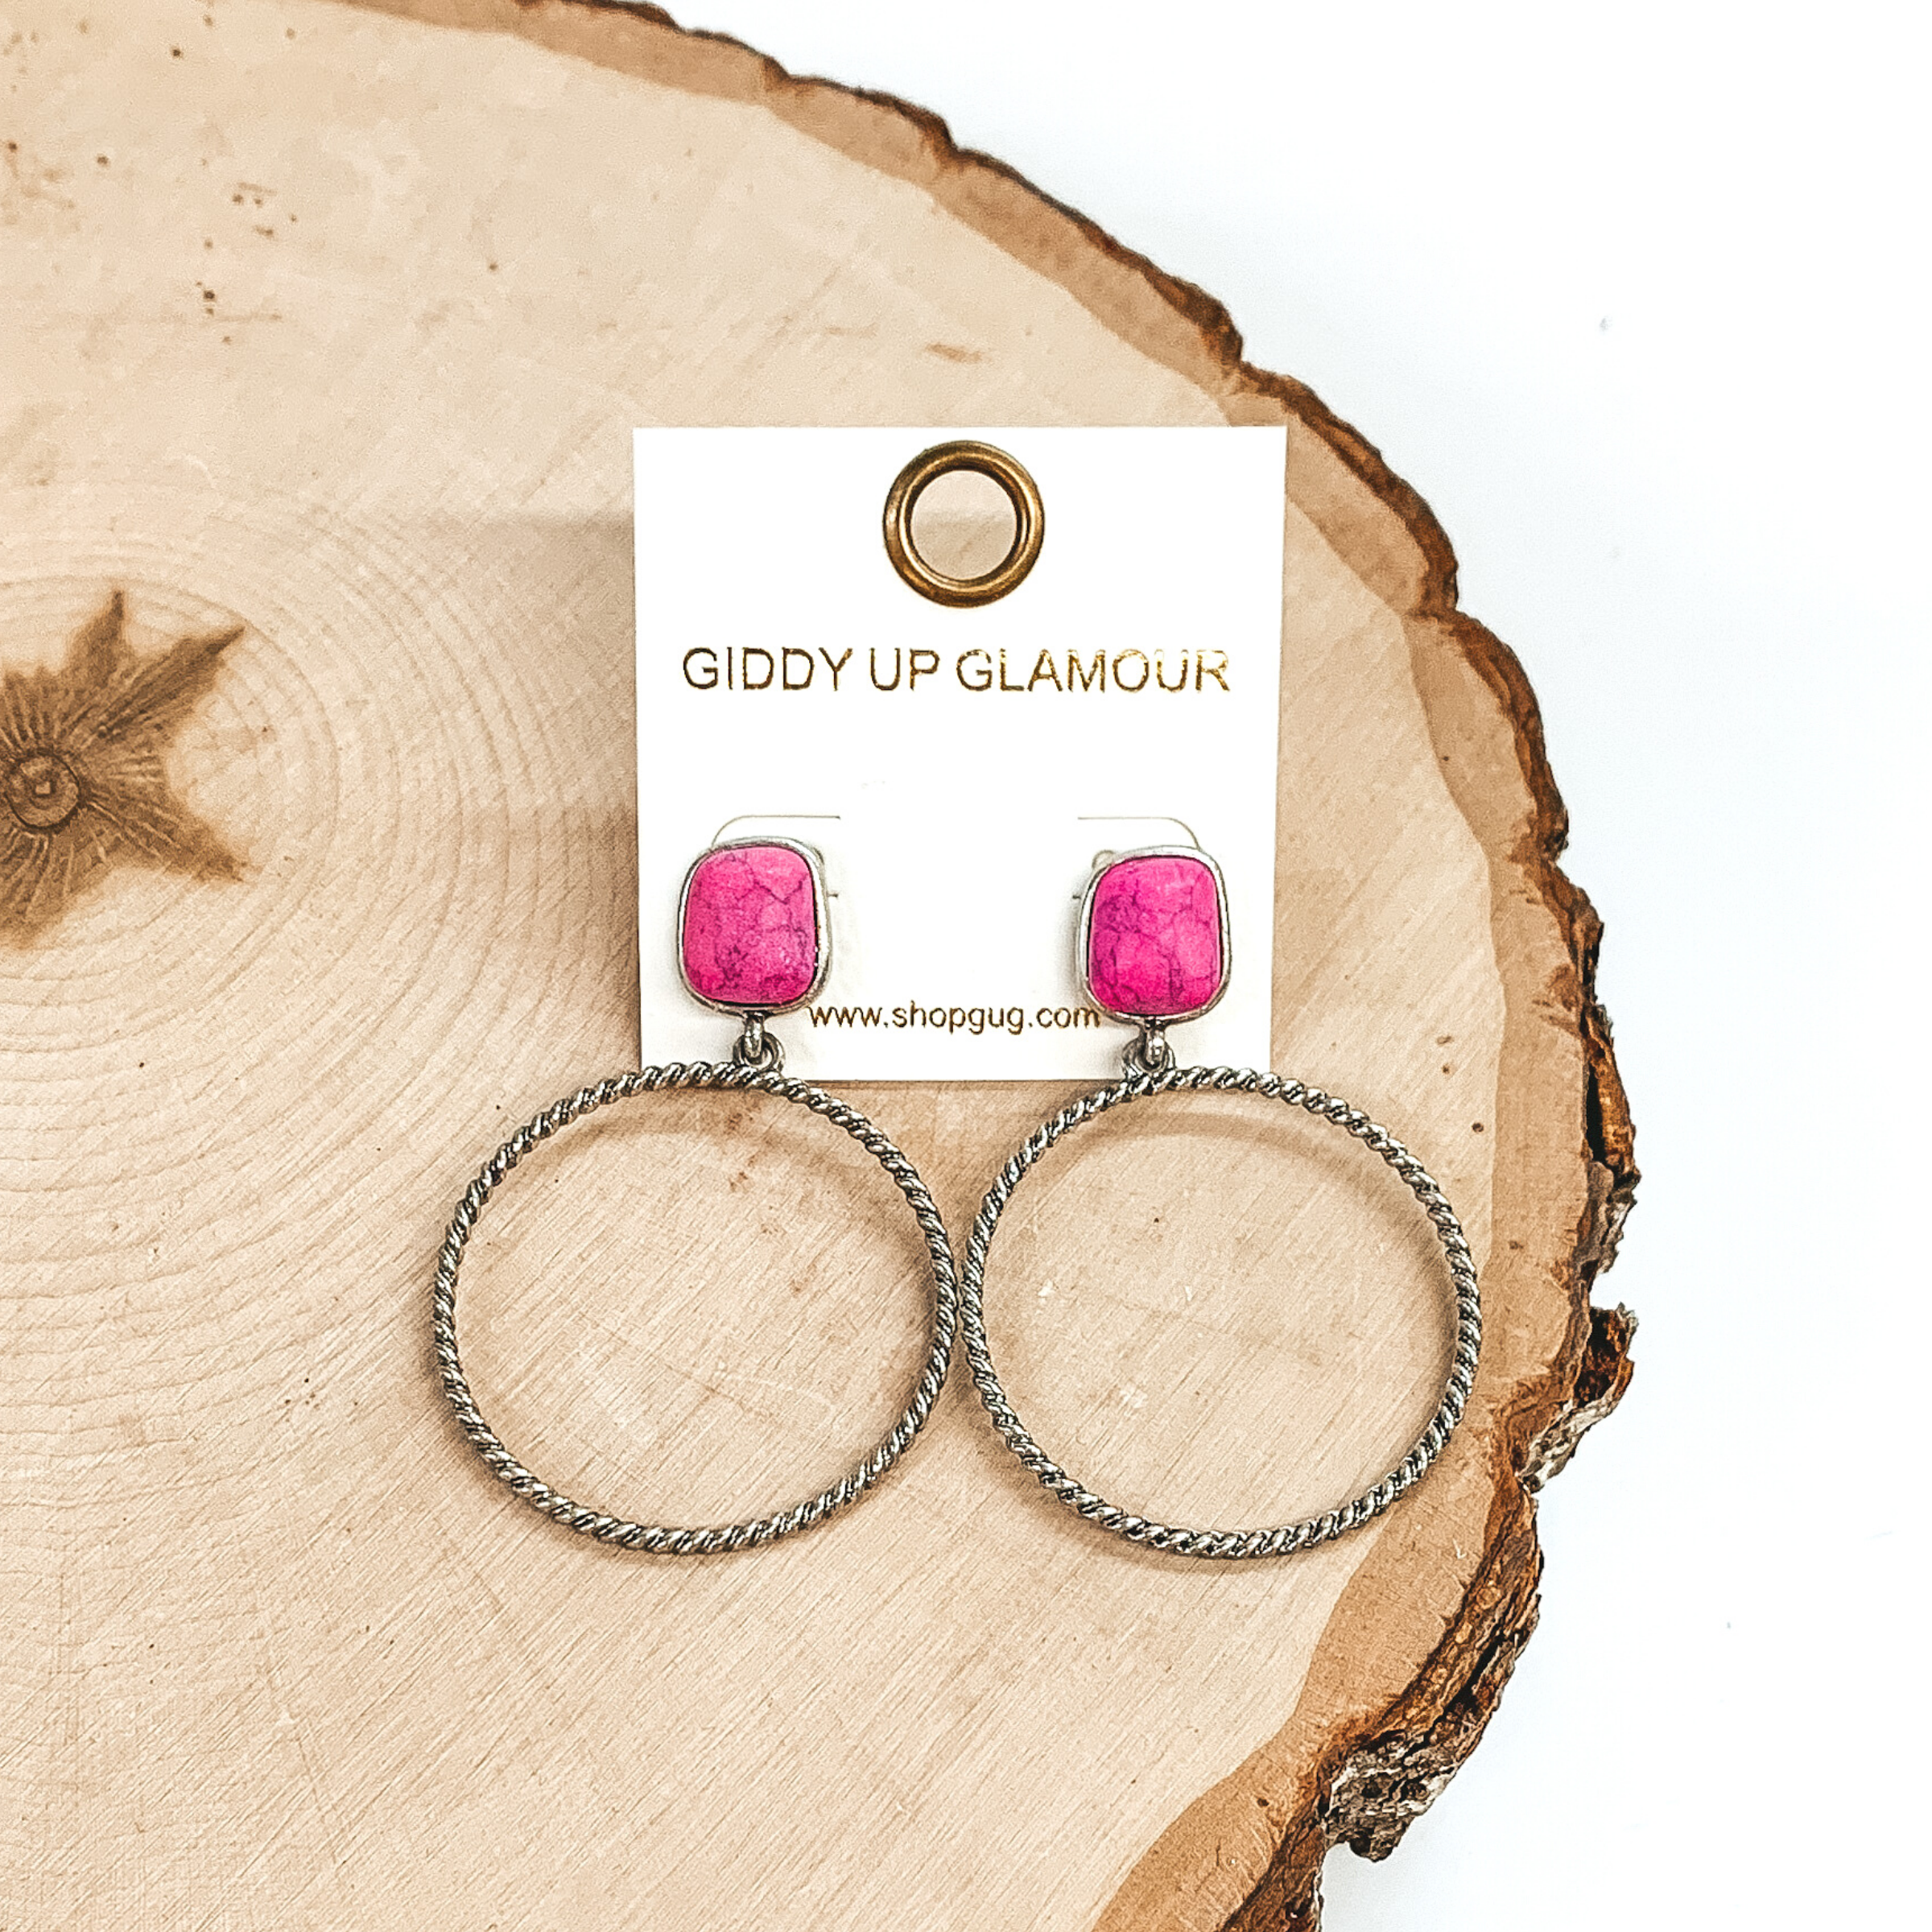 Rounded, square stone stud earrings in pink with a silver, twisted open circle pendant hanging from the bottom. These earrings are pictured on a piece of wood on a white background. 